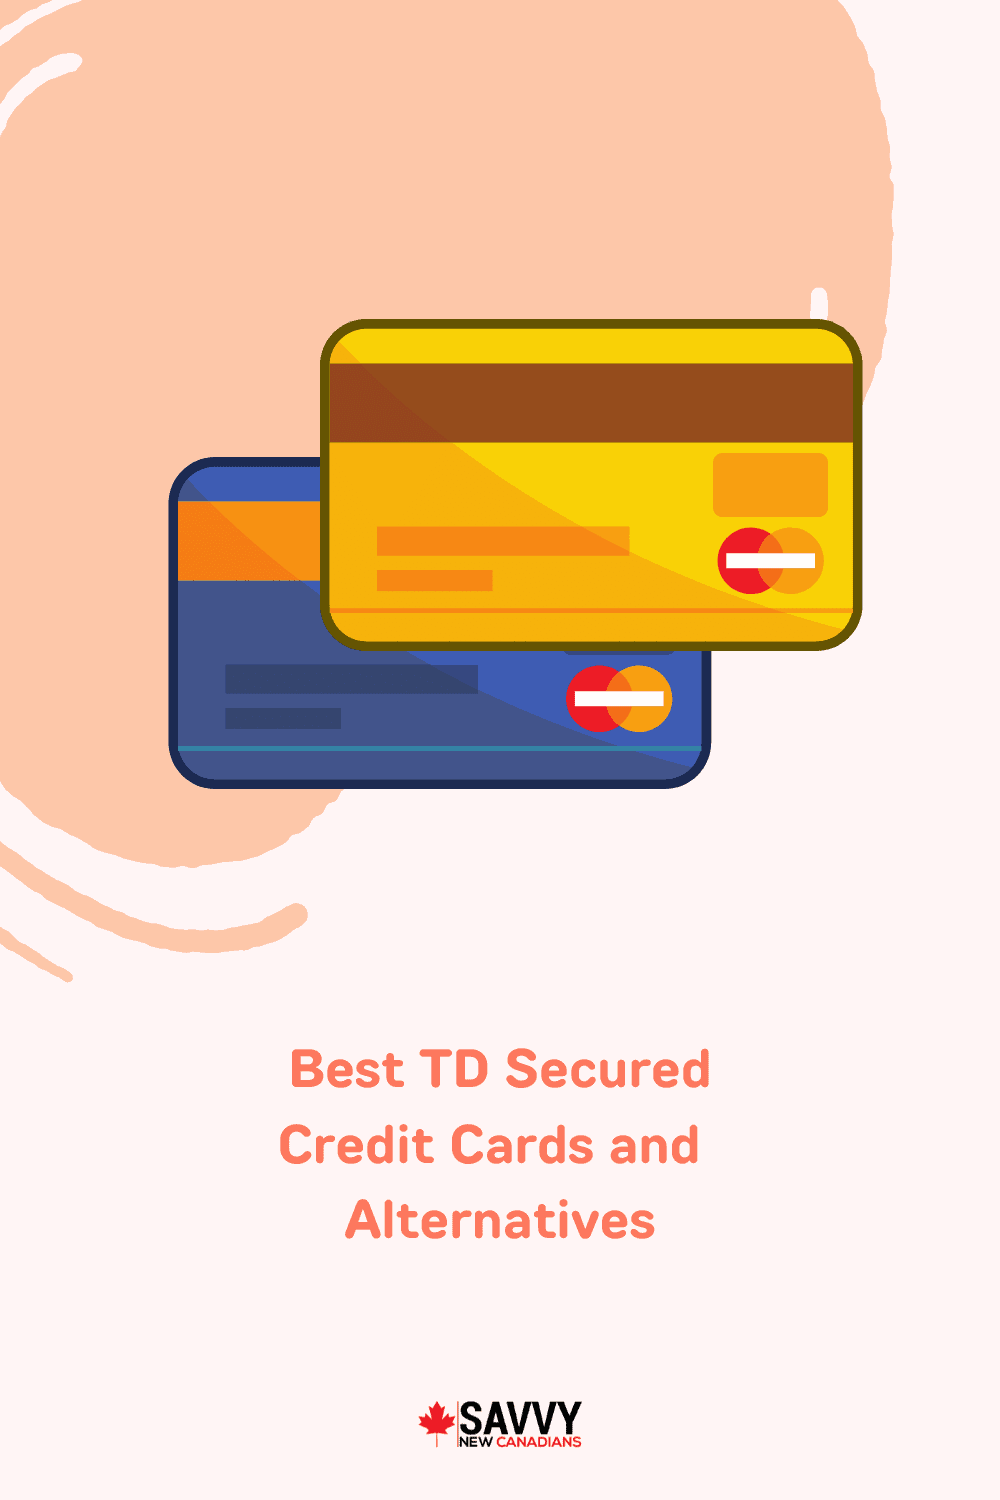 Best TD Secured Credit Cards and Alternatives in 2022